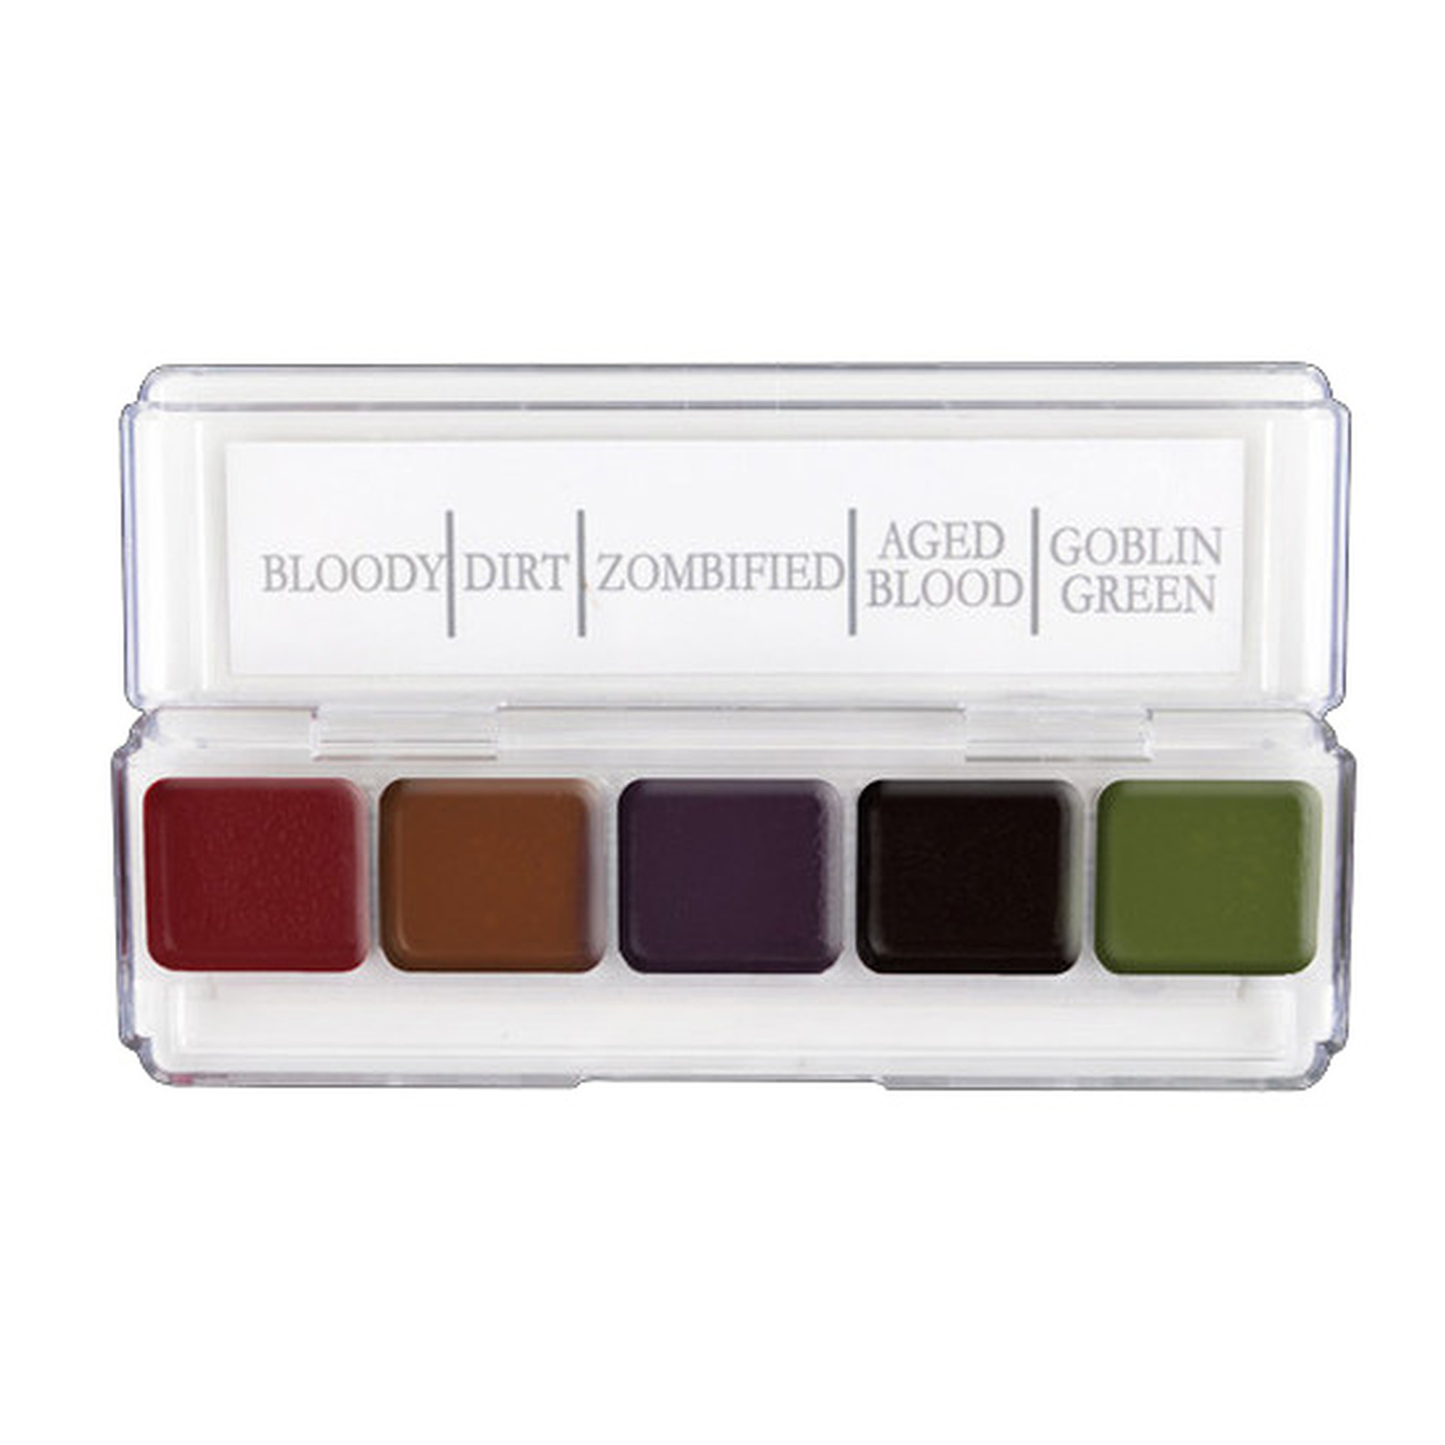 Tooth Lacquer Palettes